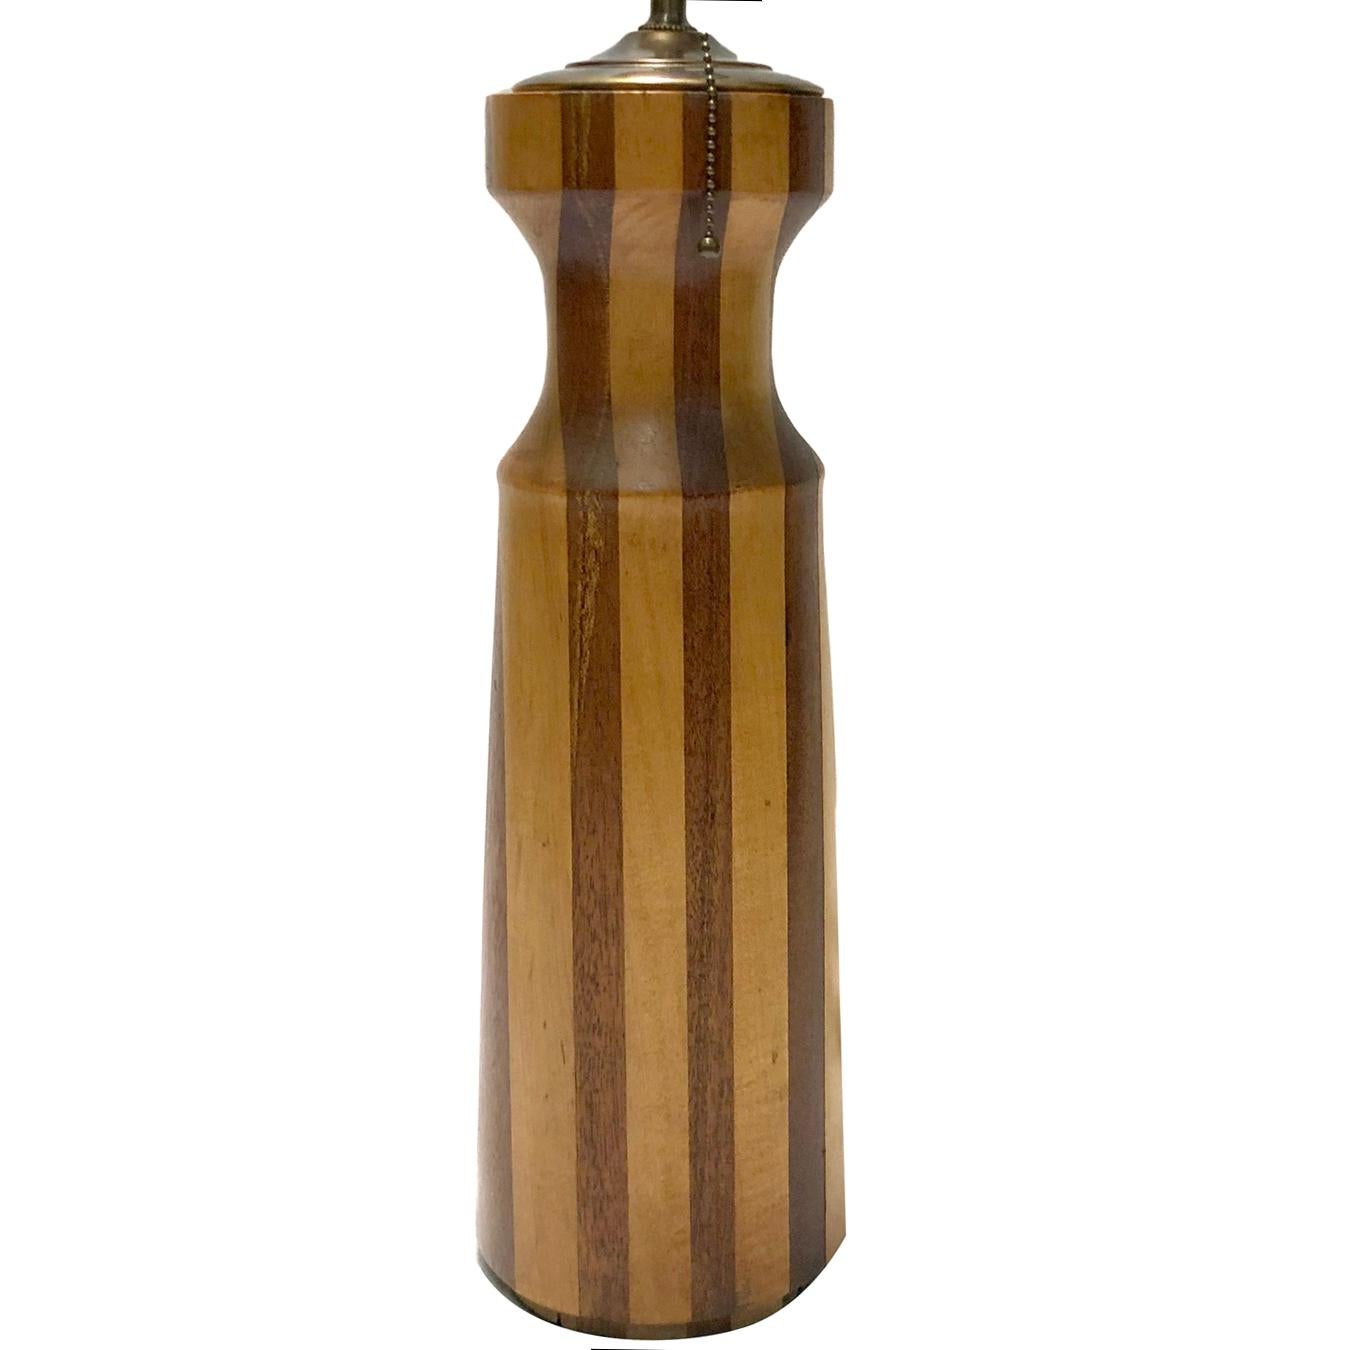 A large circa 1960s Italian two-tone turned wood marquetry table lamp.

Measurements:
Height 17